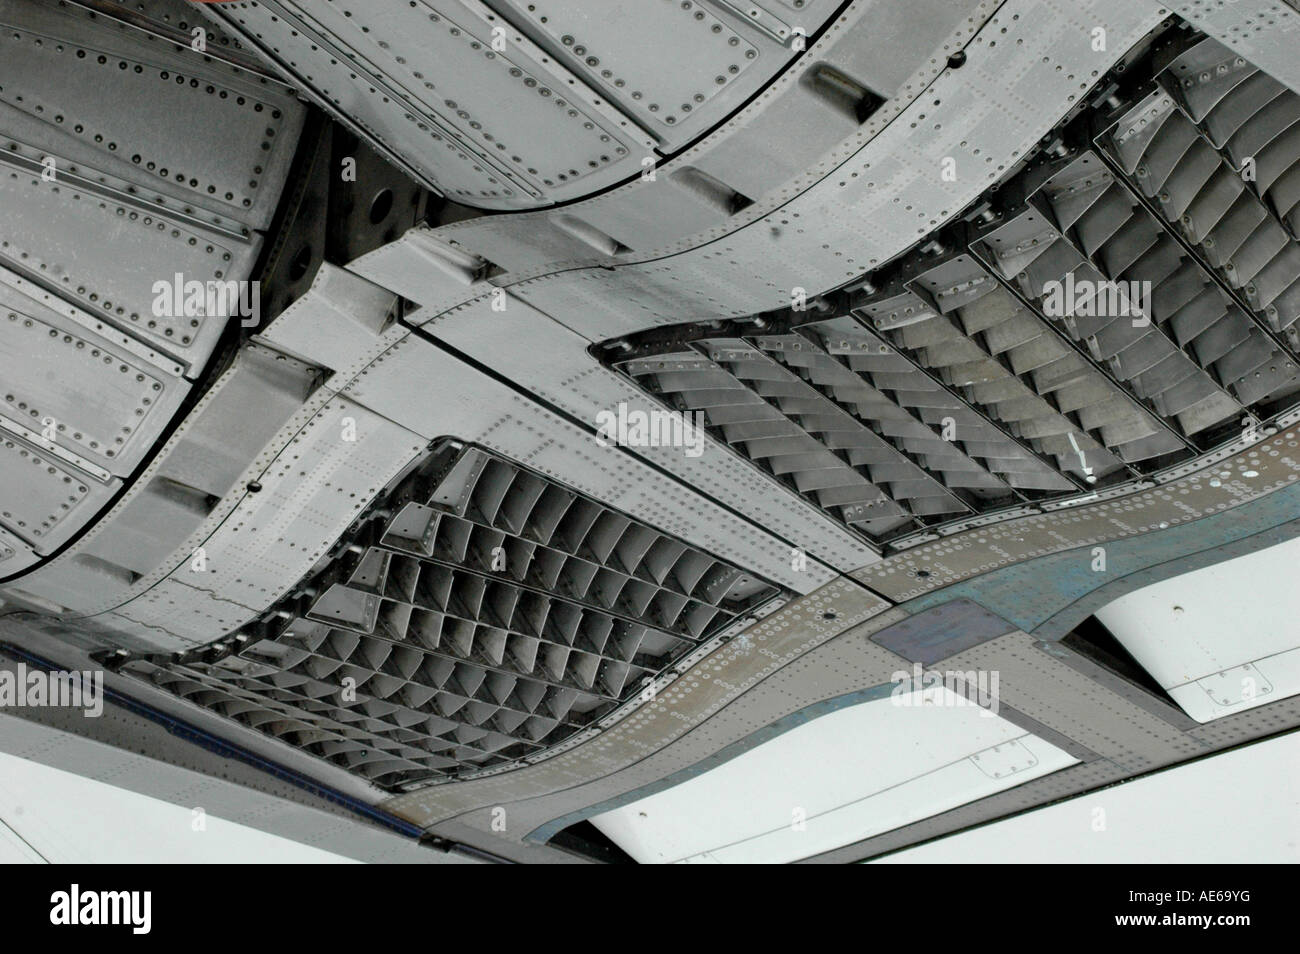 Vents on the jet engines of a Concorde supersonic jet Stock Photo